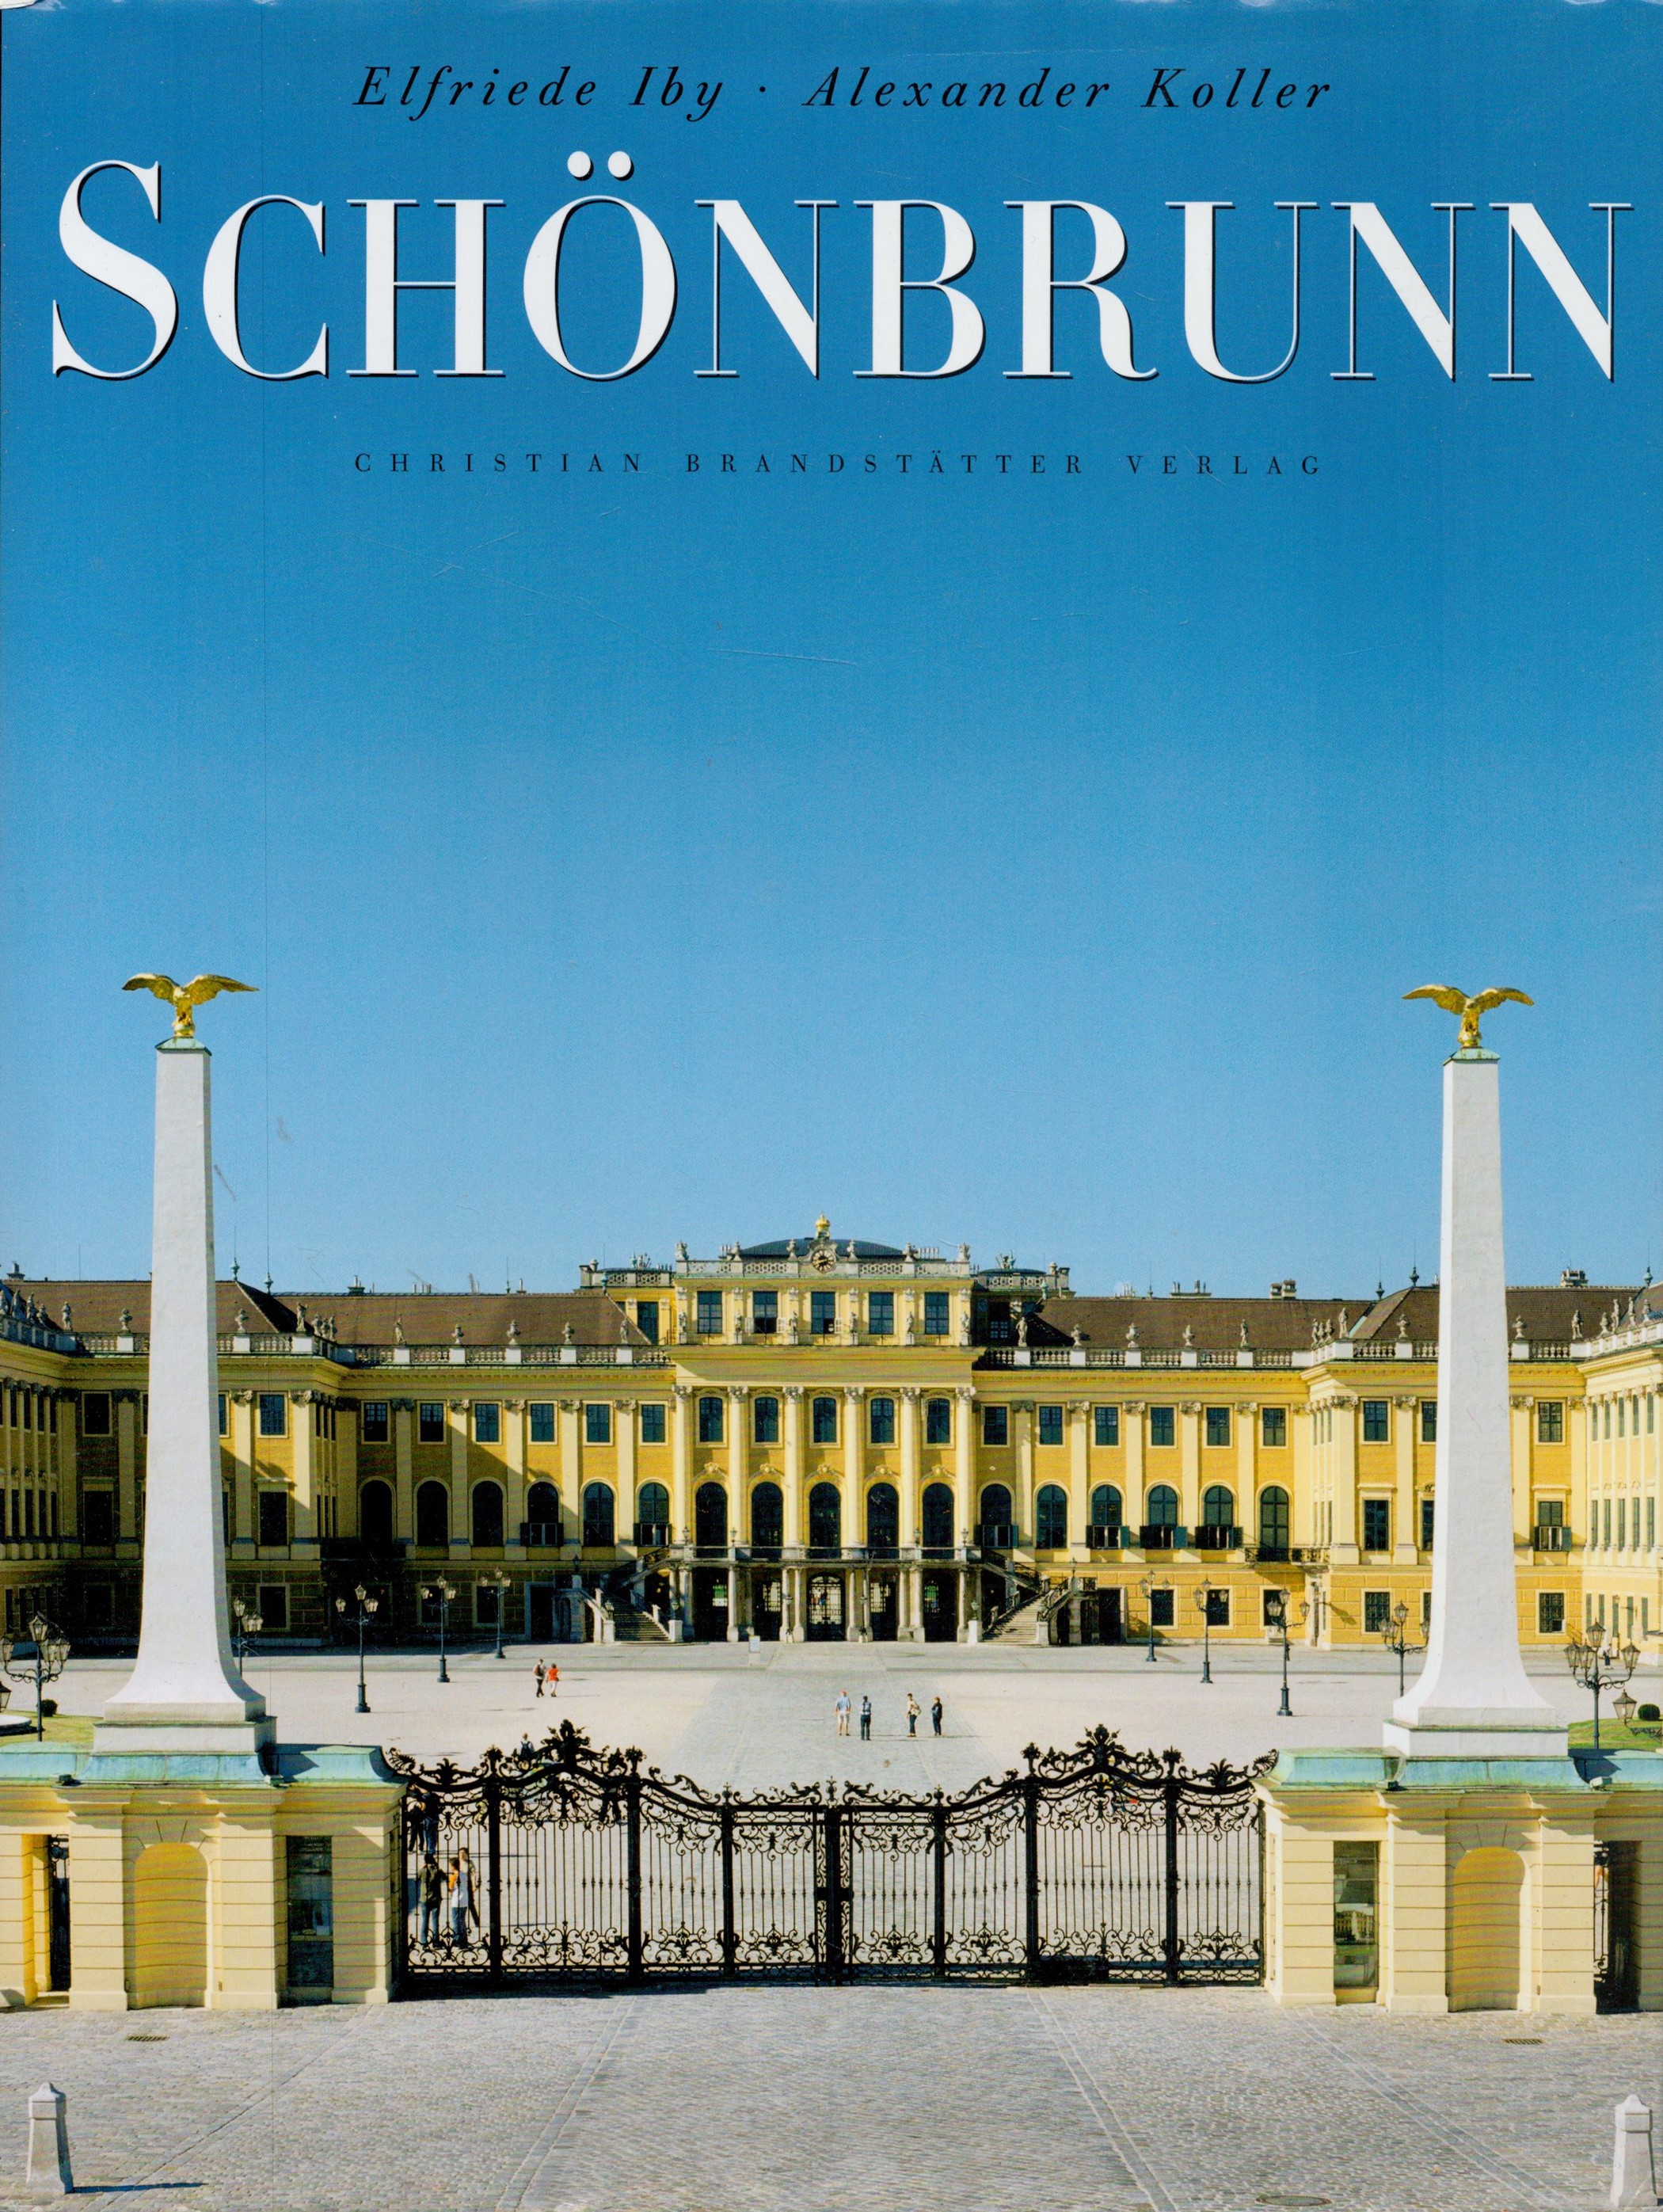 Schonbrunn by Elfriede Iby and Alexander Koller 2010 New Revised Edition Hardback Book with 304